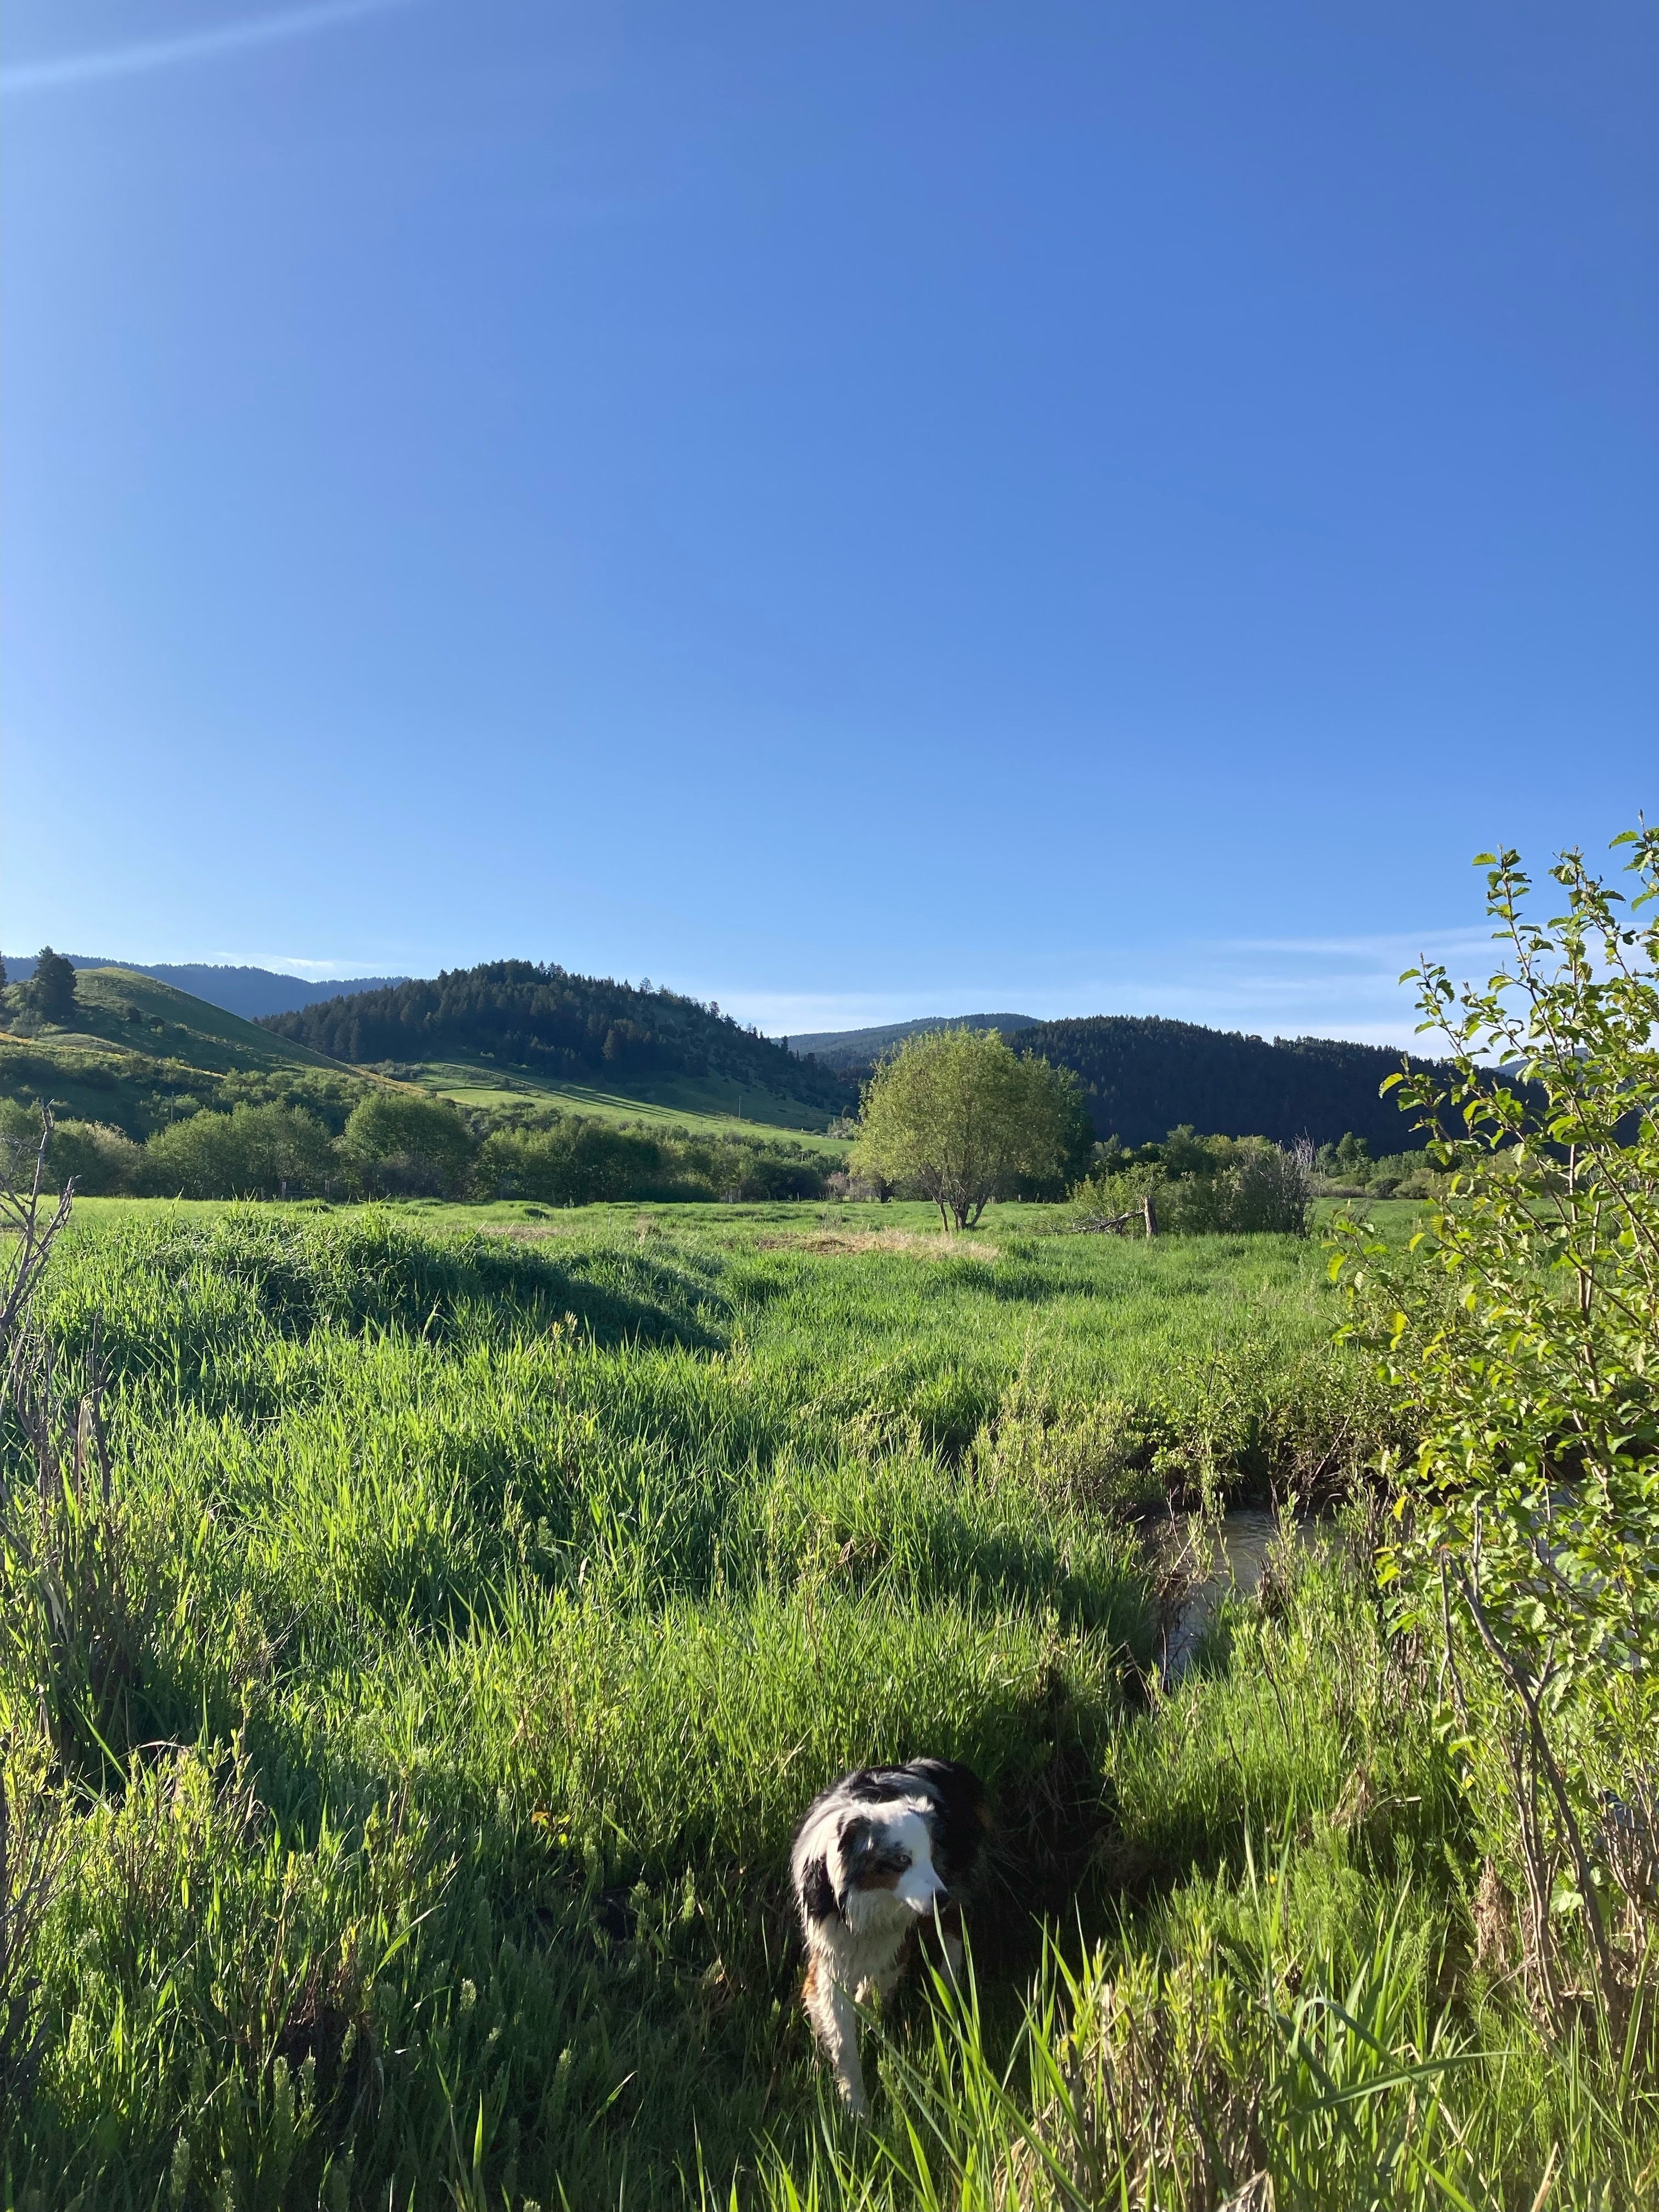 A view of a grassy field and blue sky with a white and gray dog in the foreground.